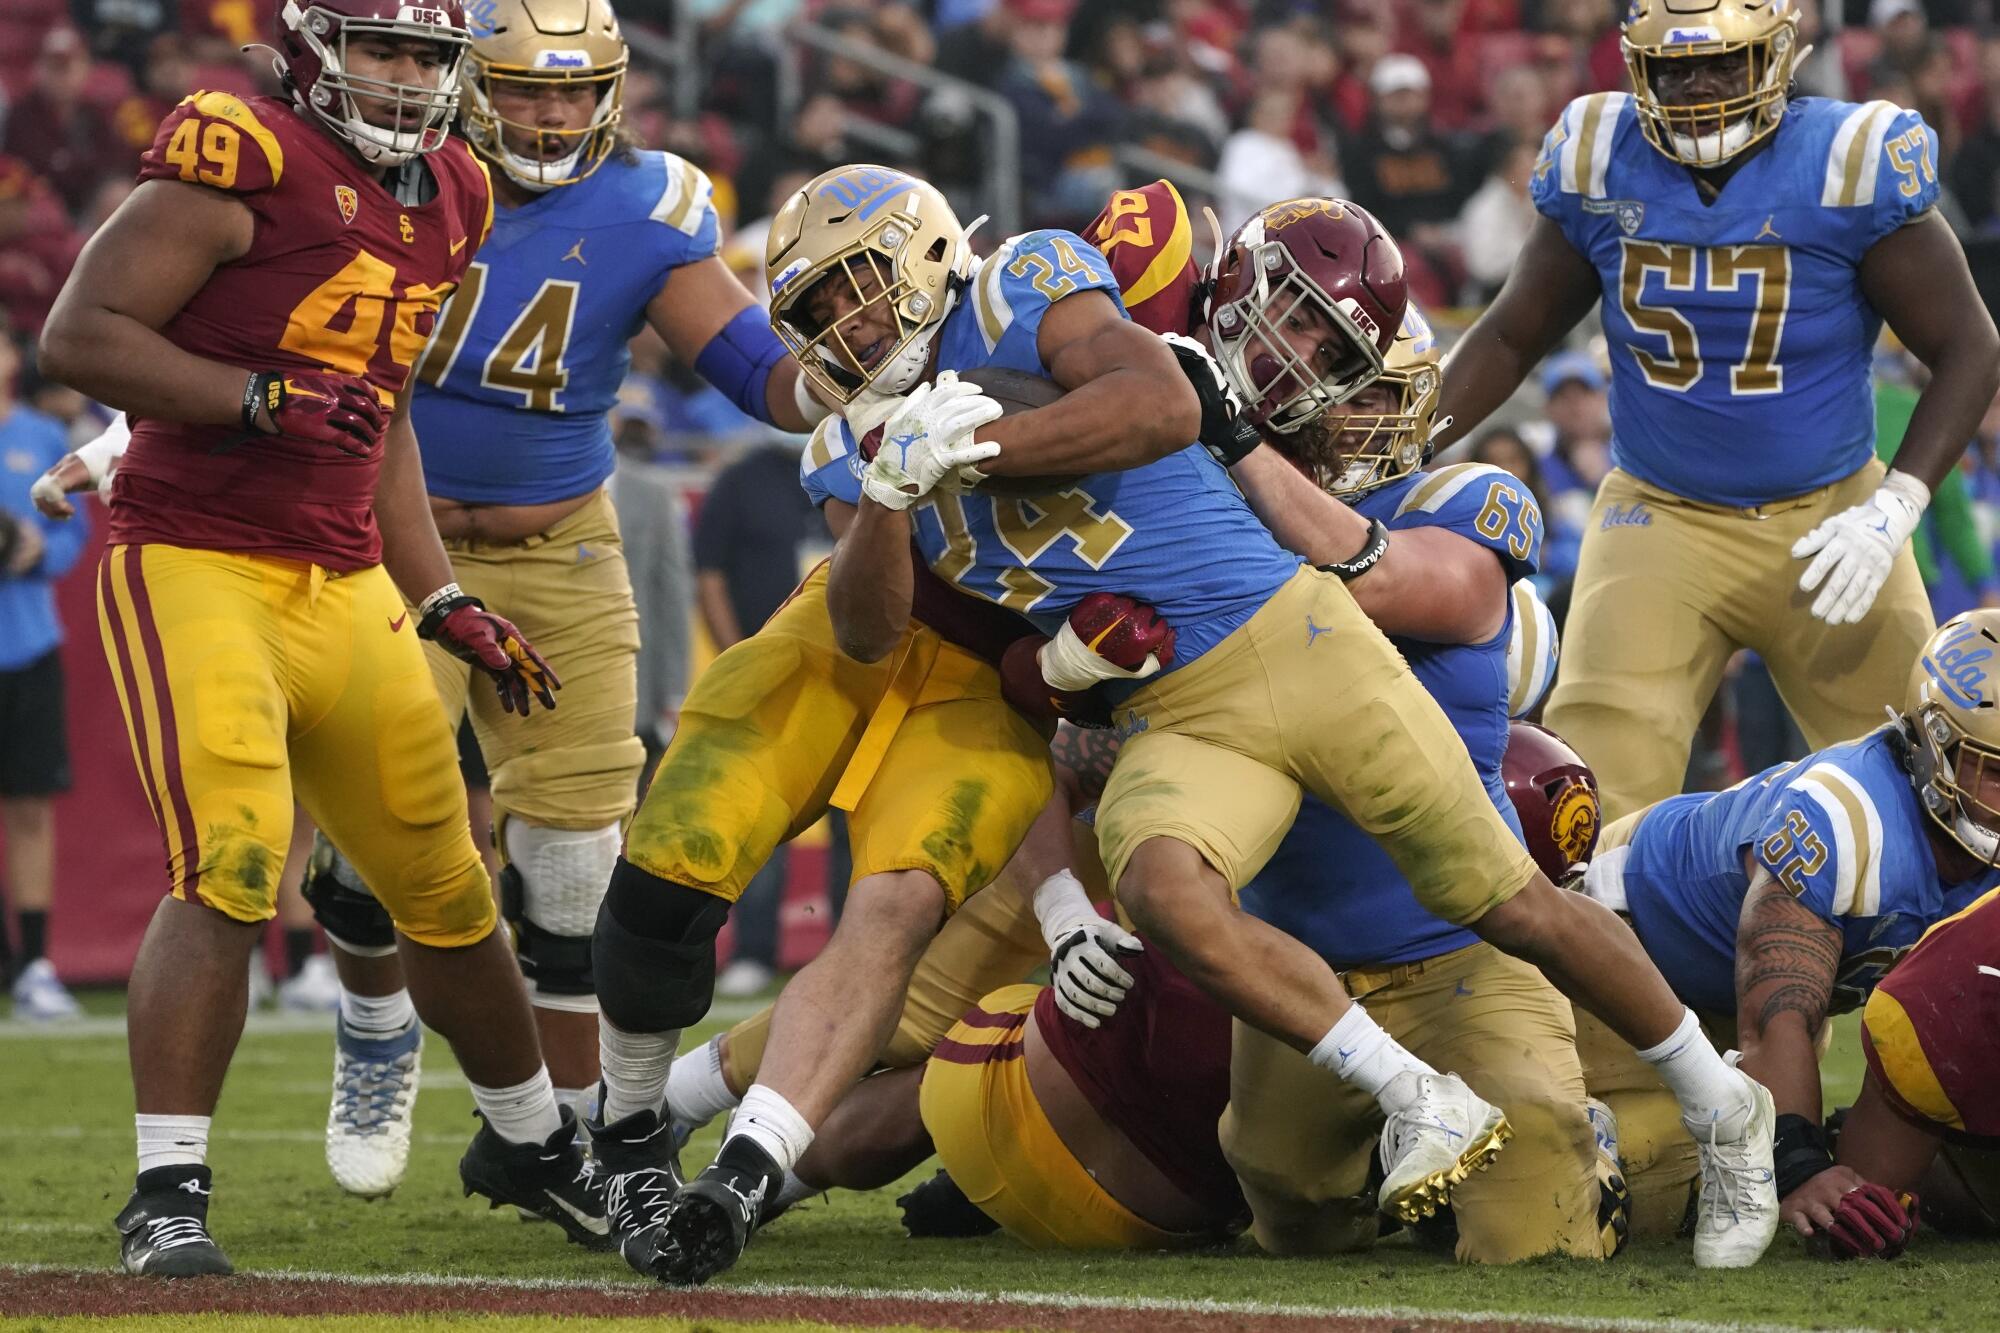 UCLA running back Zach Charbonnet scores a rushing touchdown under pressure from USC players